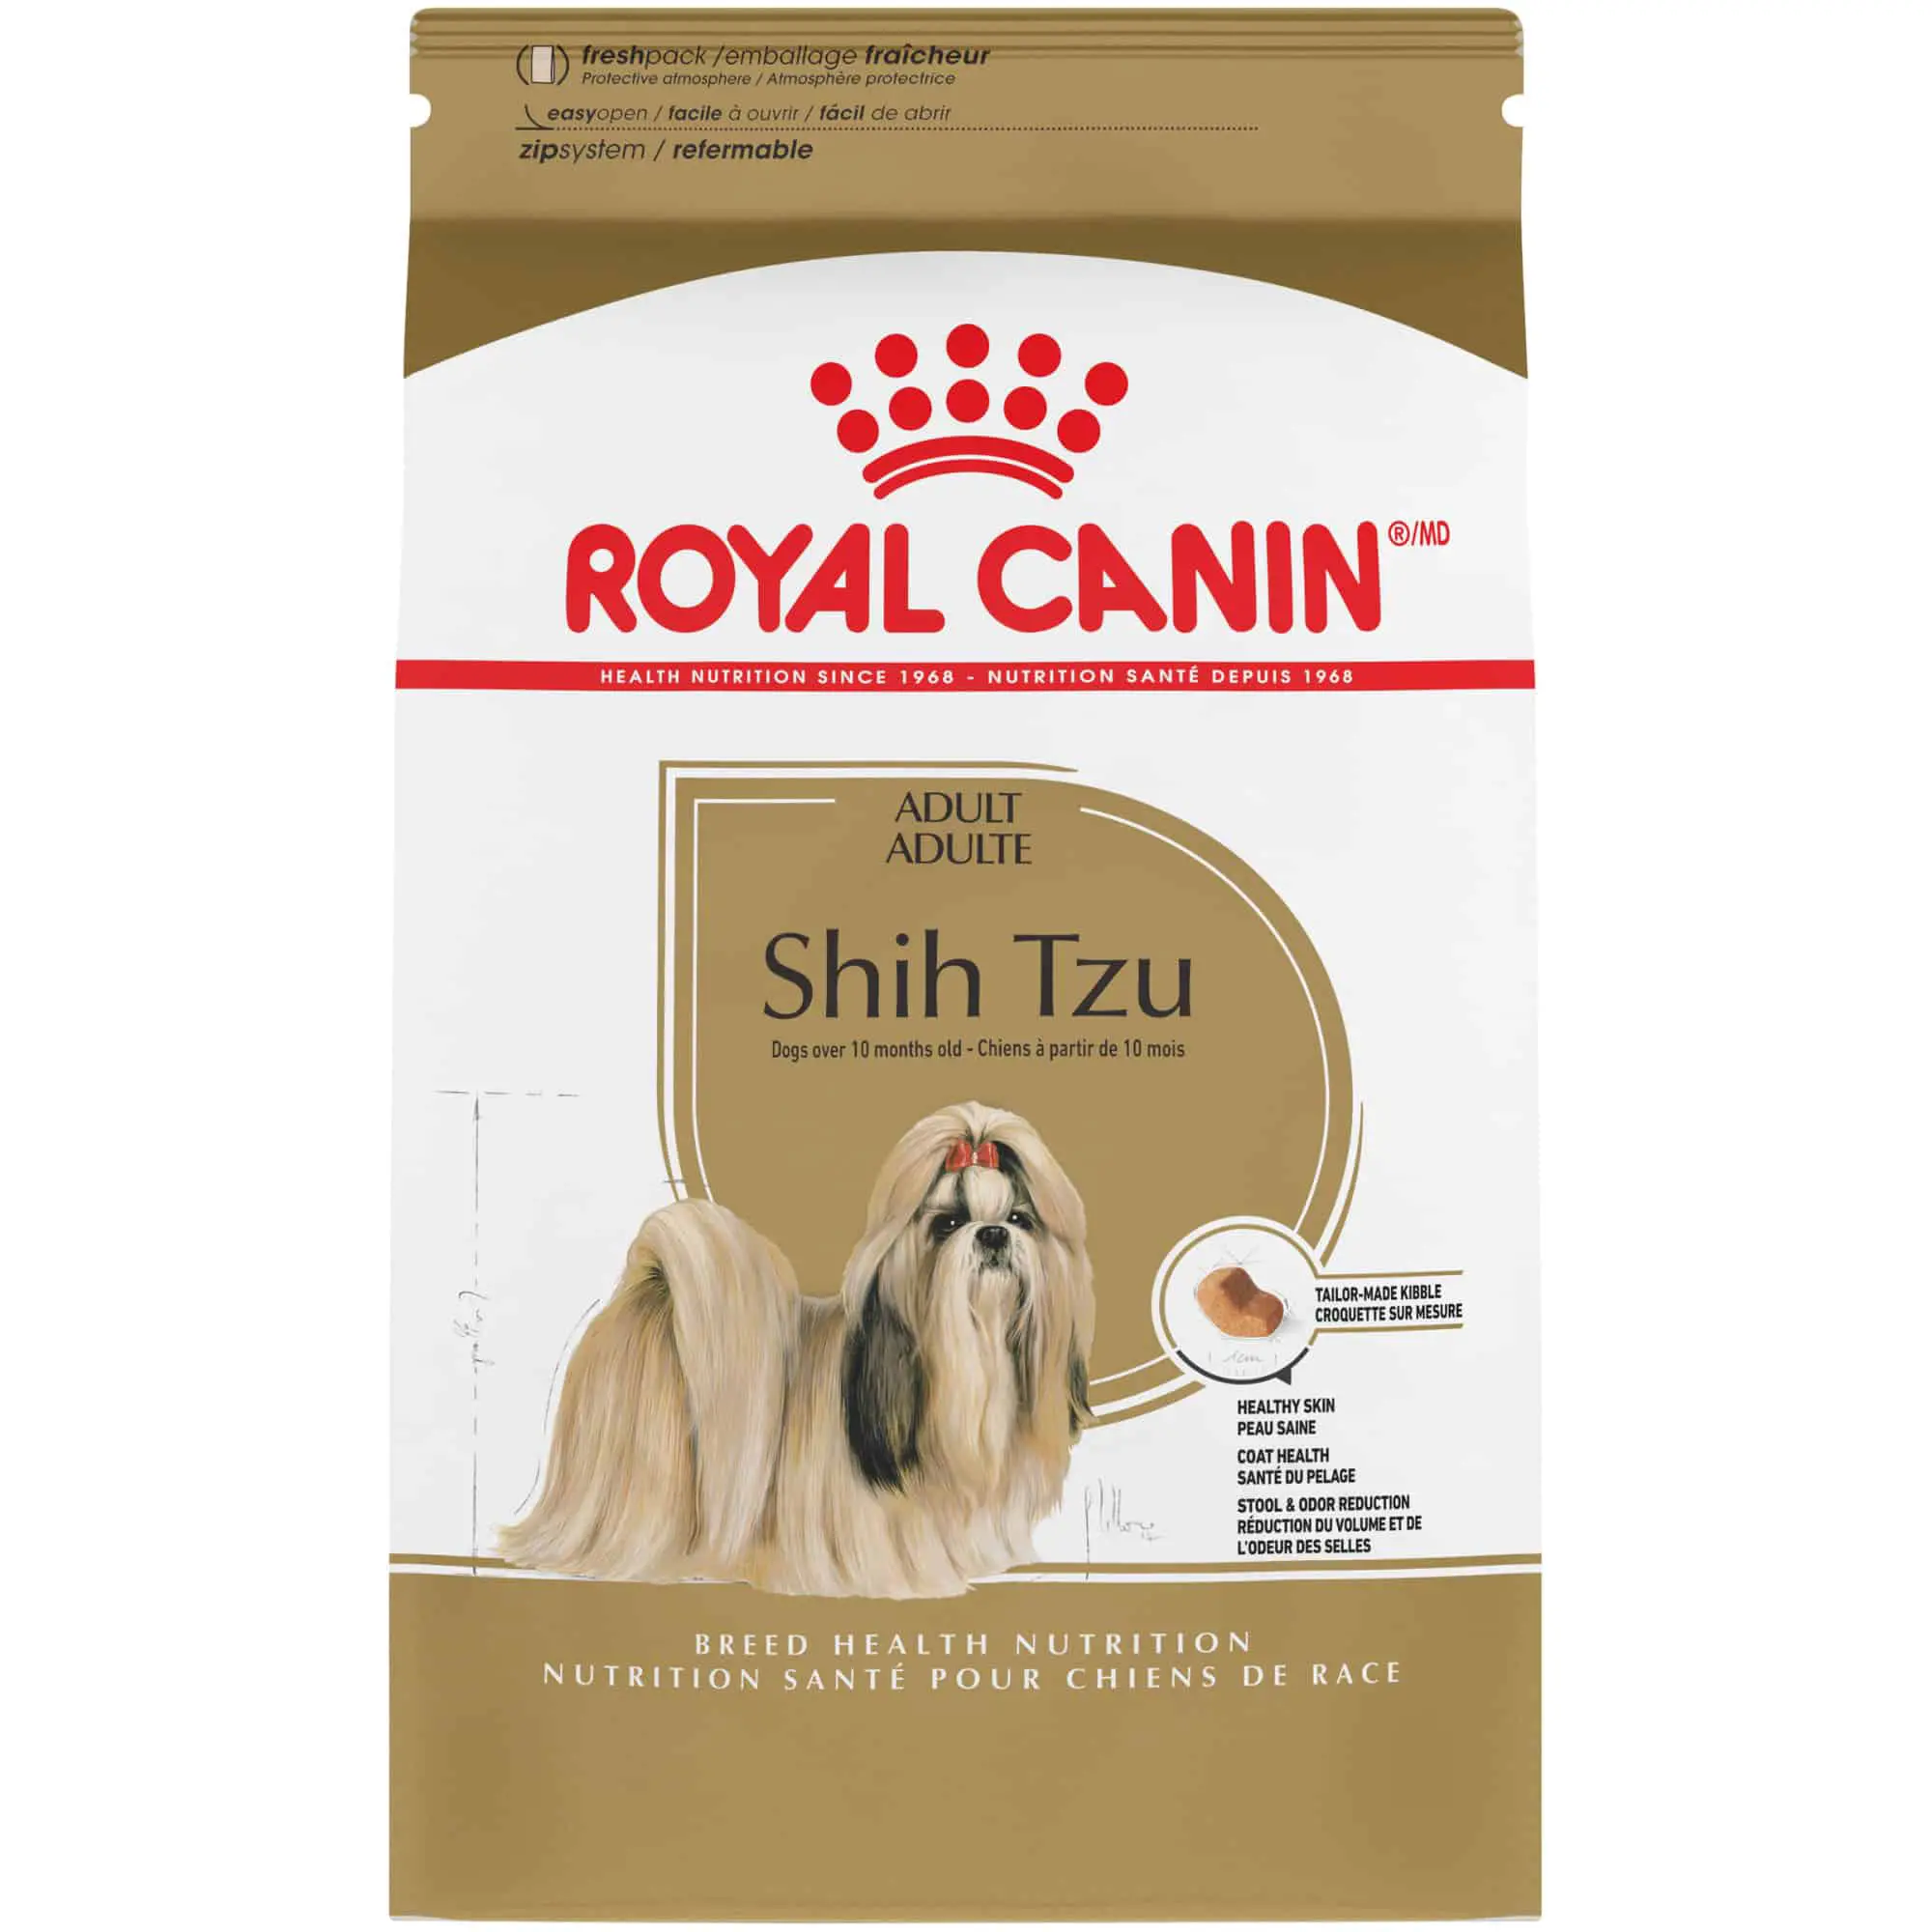 How Much Dog Food for a 19 Pound Shih'tzu?